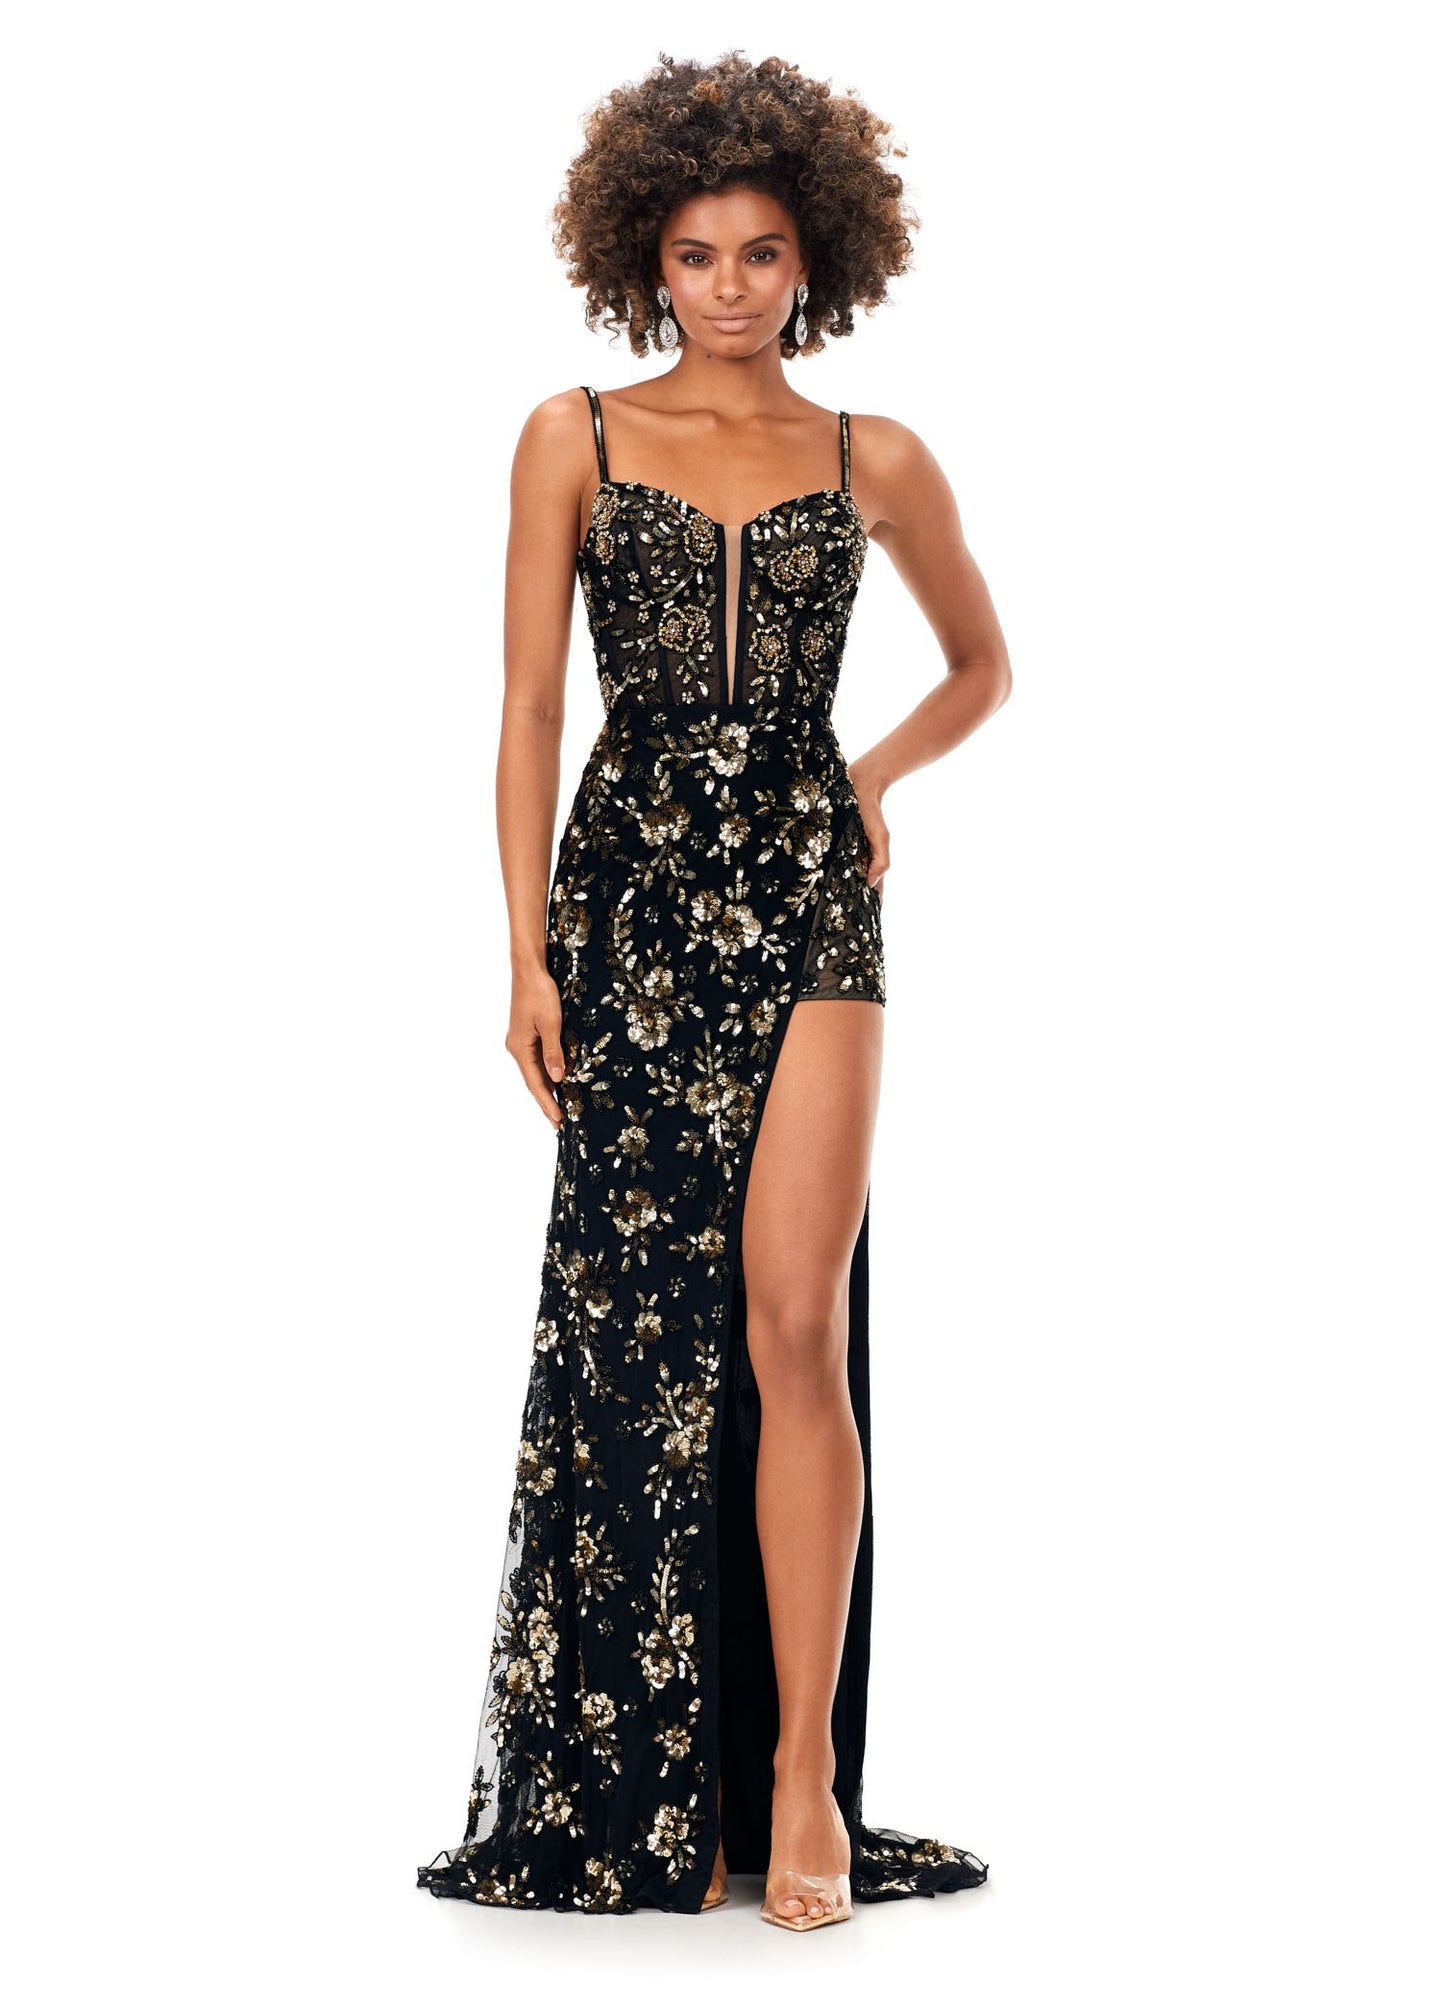 Ashley Lauren 11360 This floral beaded gown features a corset bustier with plunging v-neckline. The look is complete with a fitted skirt with high left leg slit. Sweetheart Neckline Corset Bustier Lace Up Back Left Leg Slit COLORS: Ivory, Blush, Gold/Black, Peacock, Fuchsia/Red